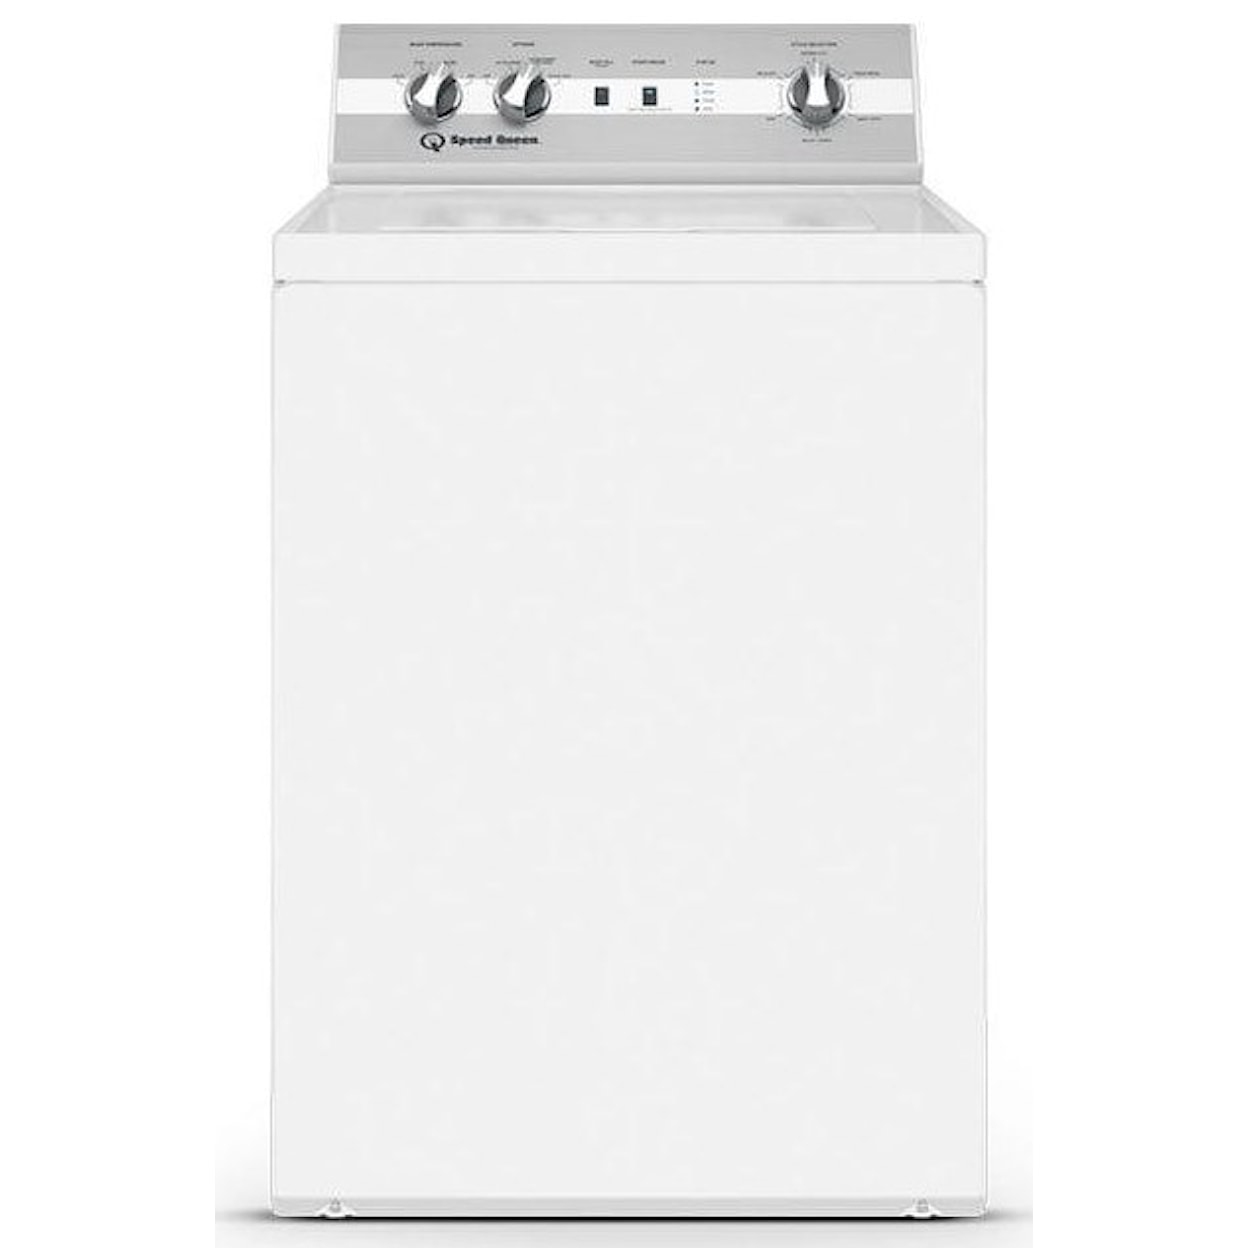 Speed Queen Washers TC5 Top Load Washer